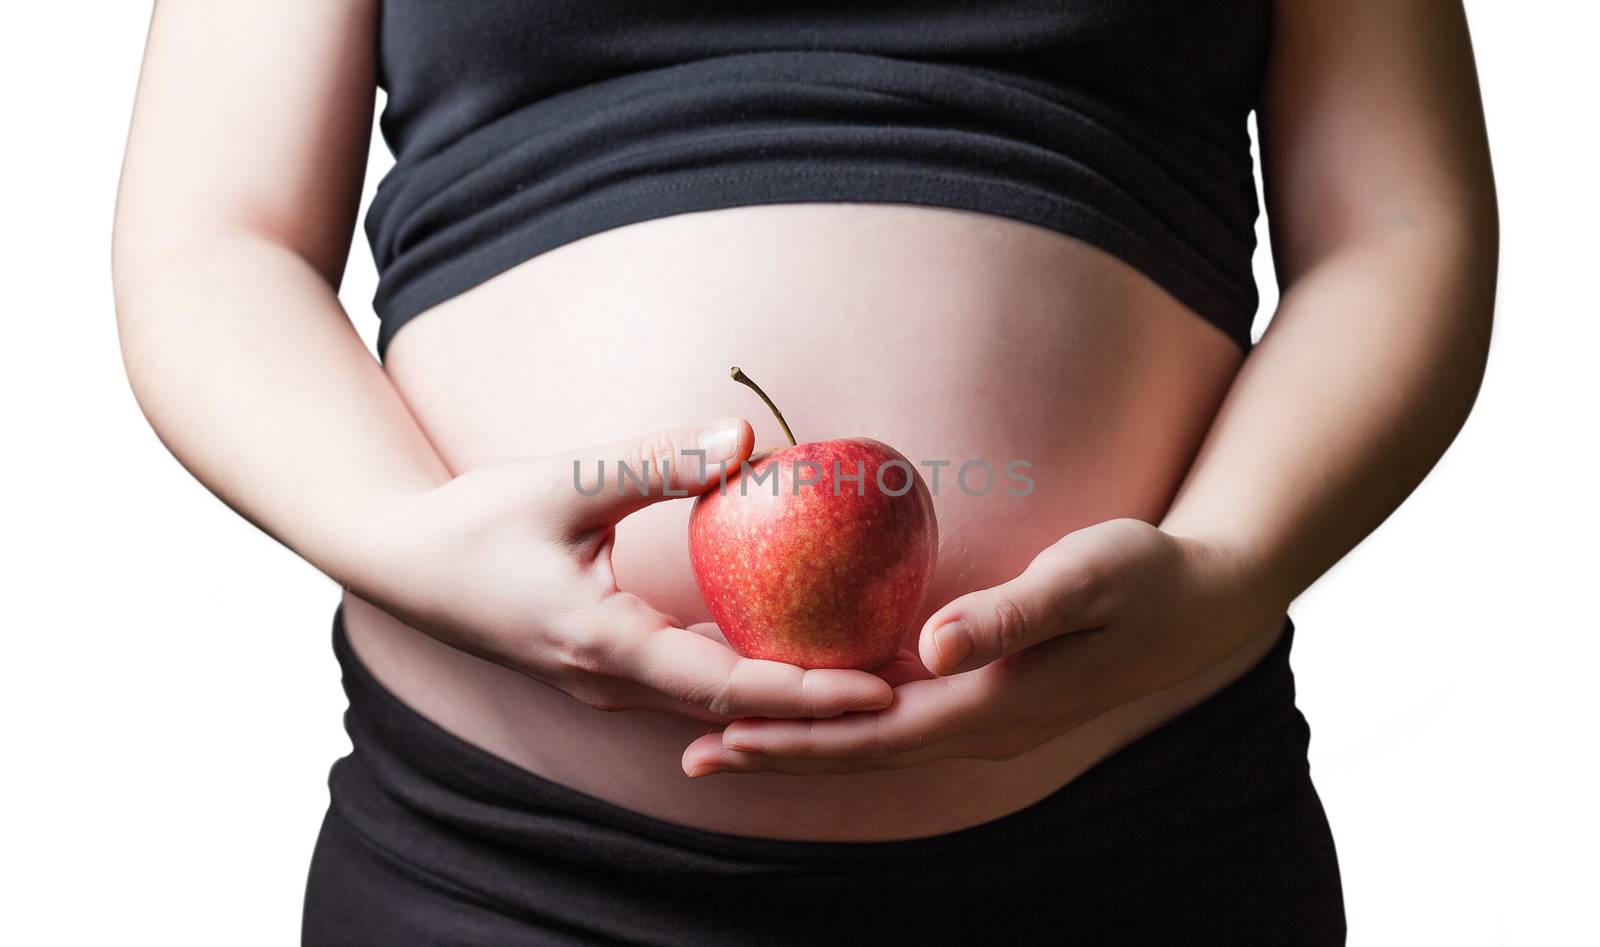 Pregnant woman holding a red apple in her hands by doble.d